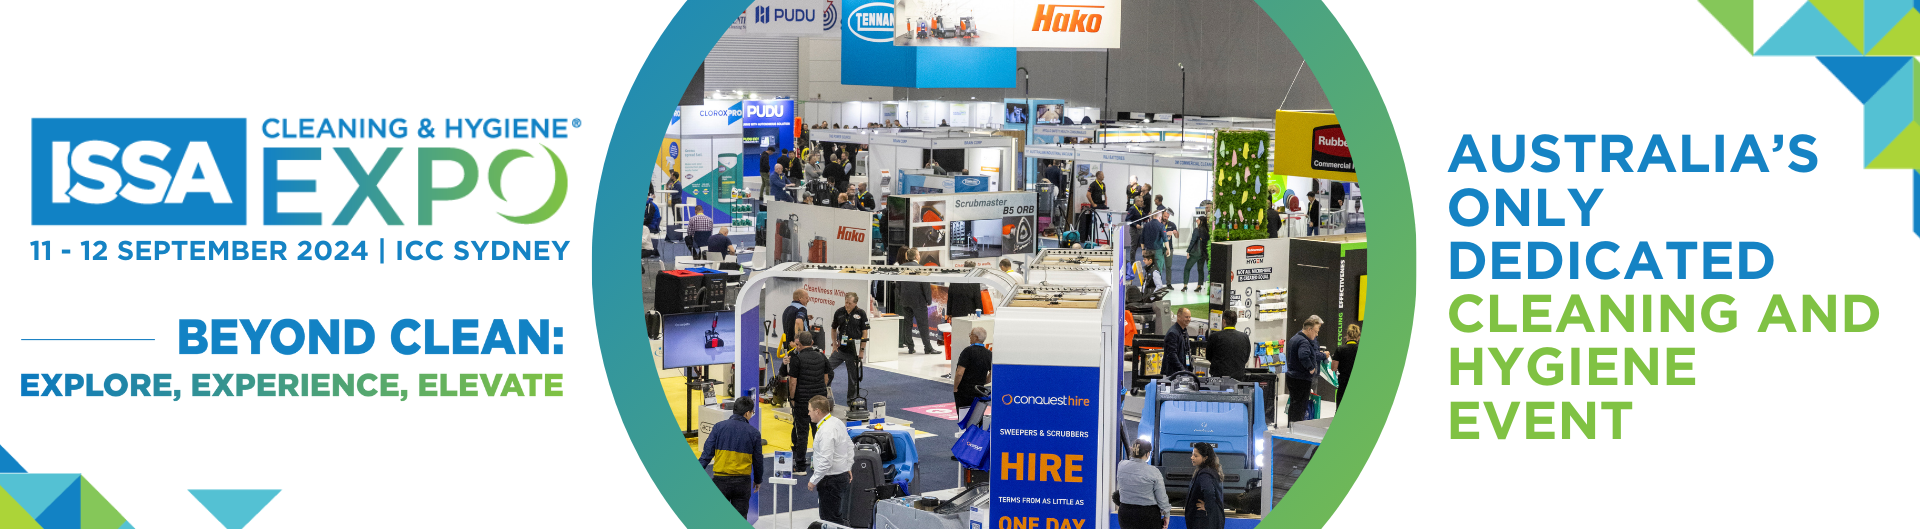 ISSA Cleaning and Hygiene Expo is coming to ICC Sydney on 11 to 12 September 2024.